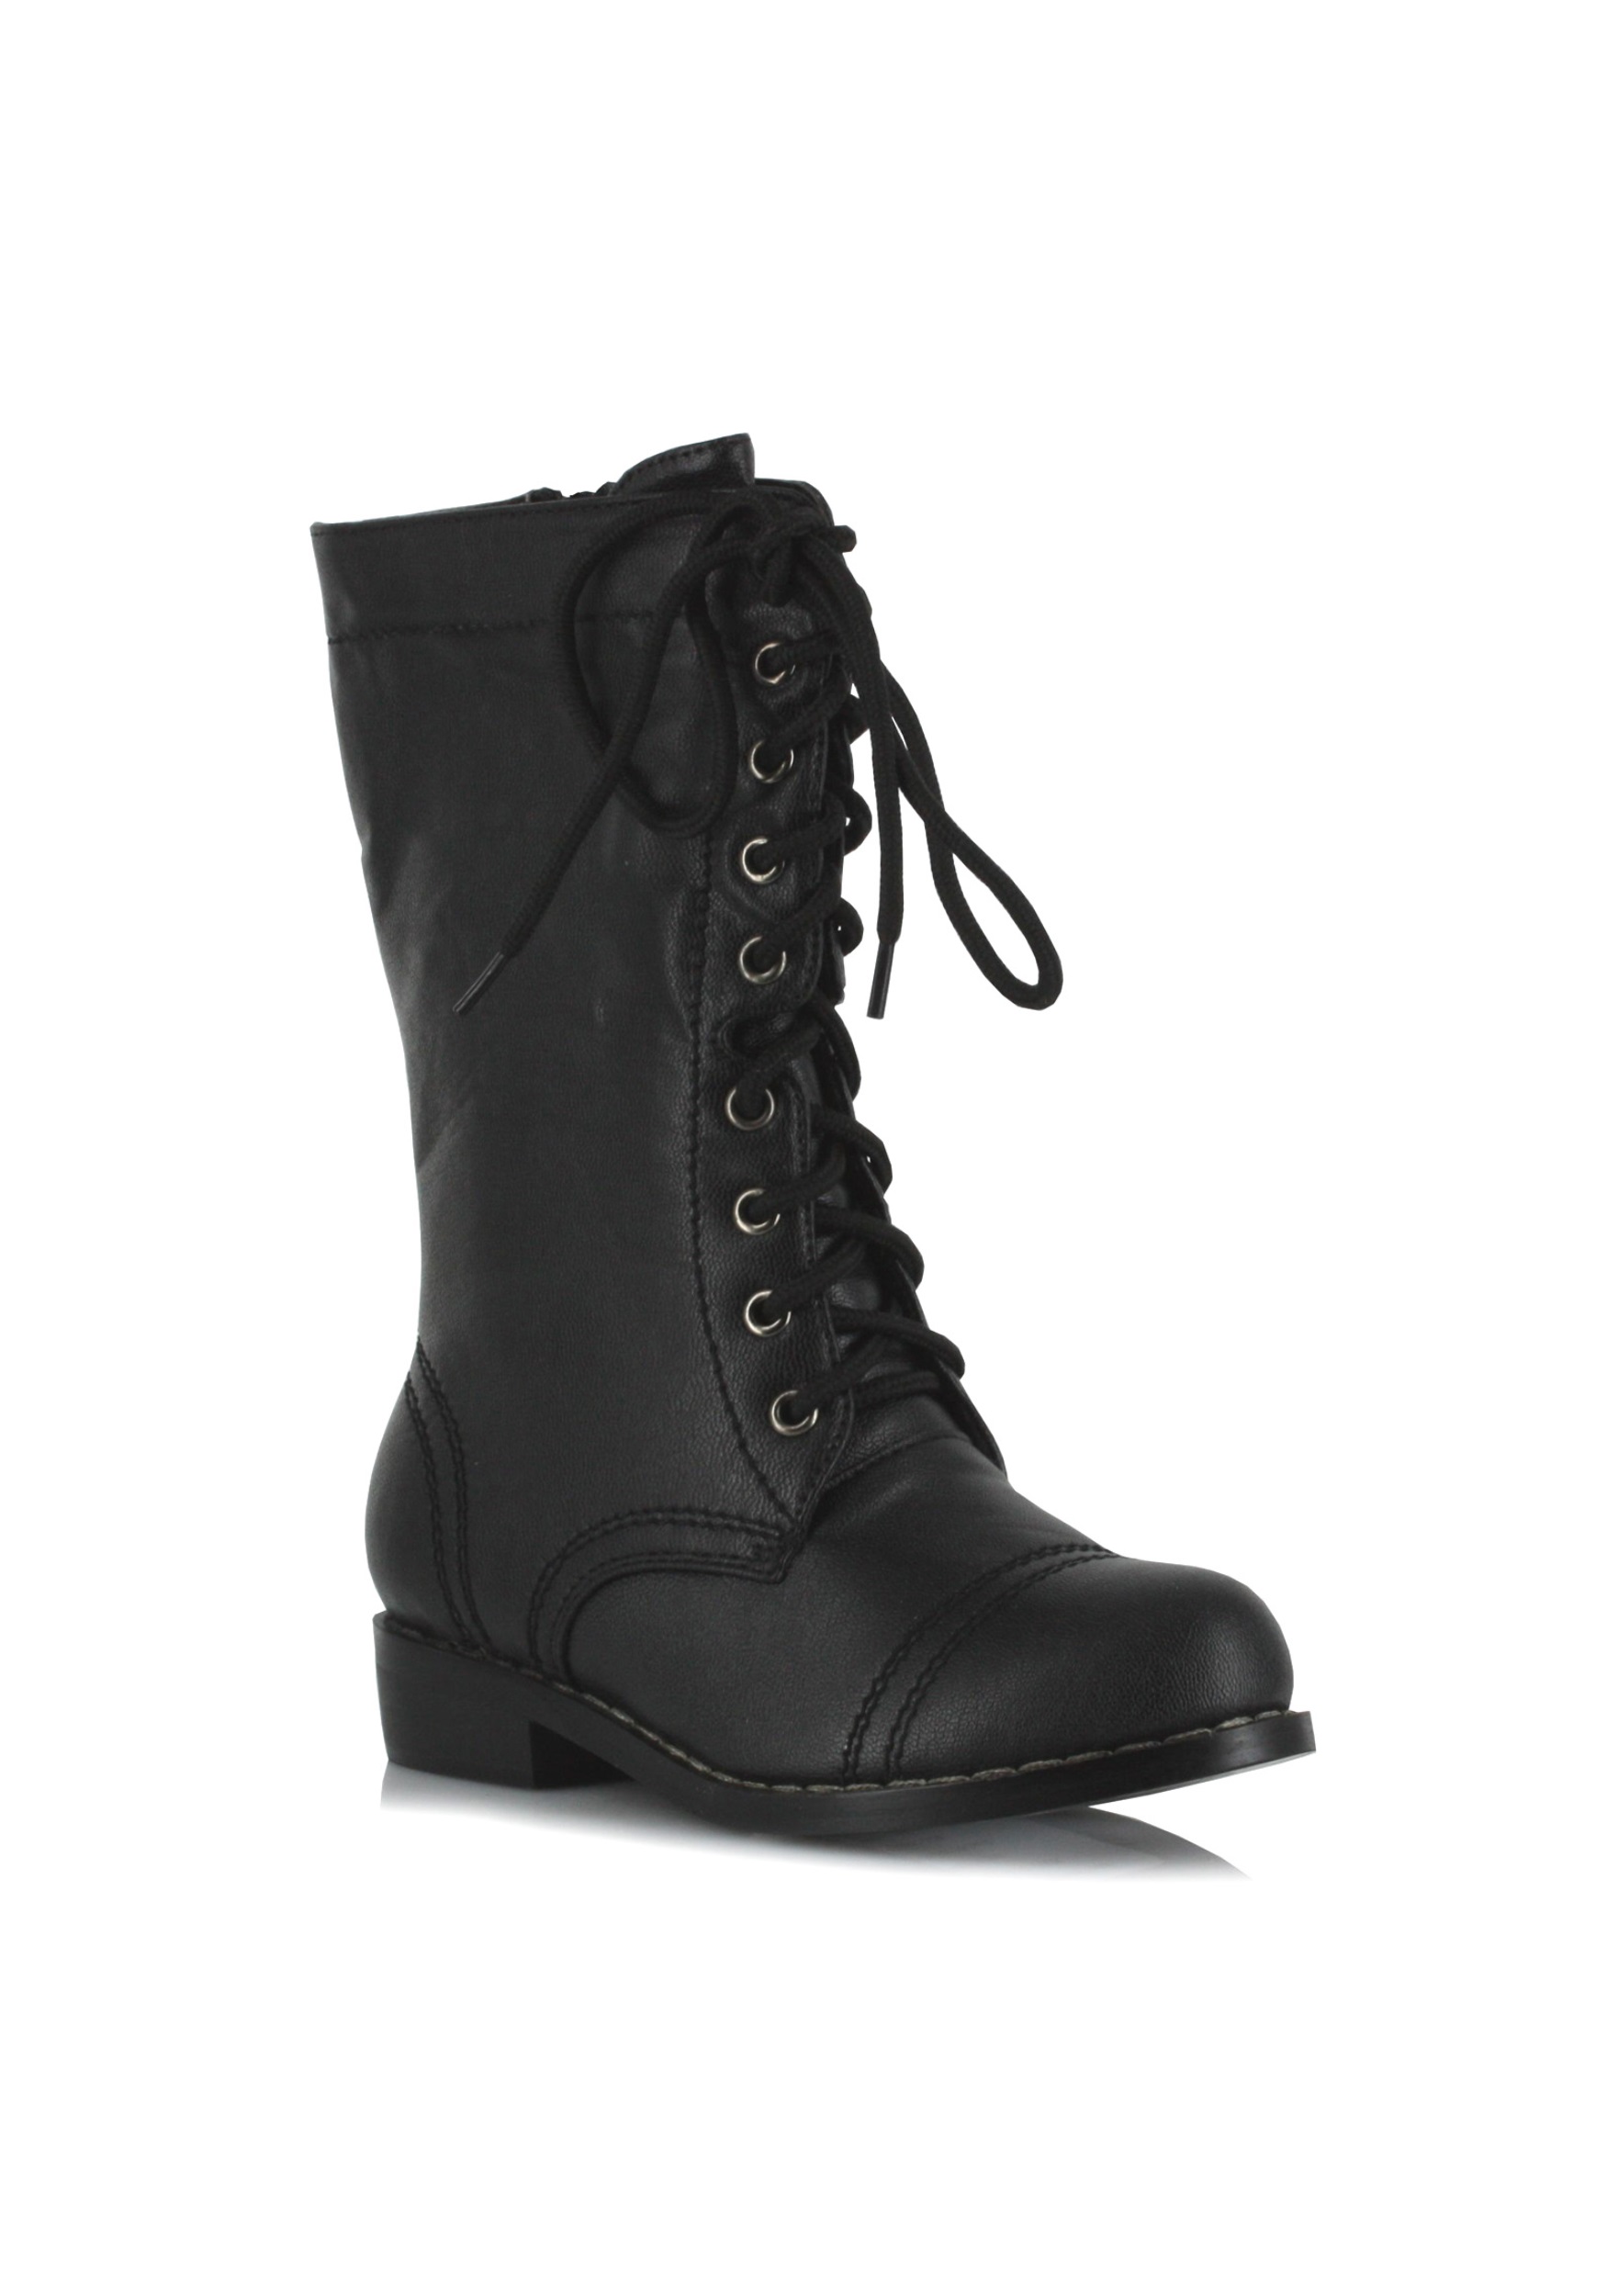 Black Military Boots for Kids